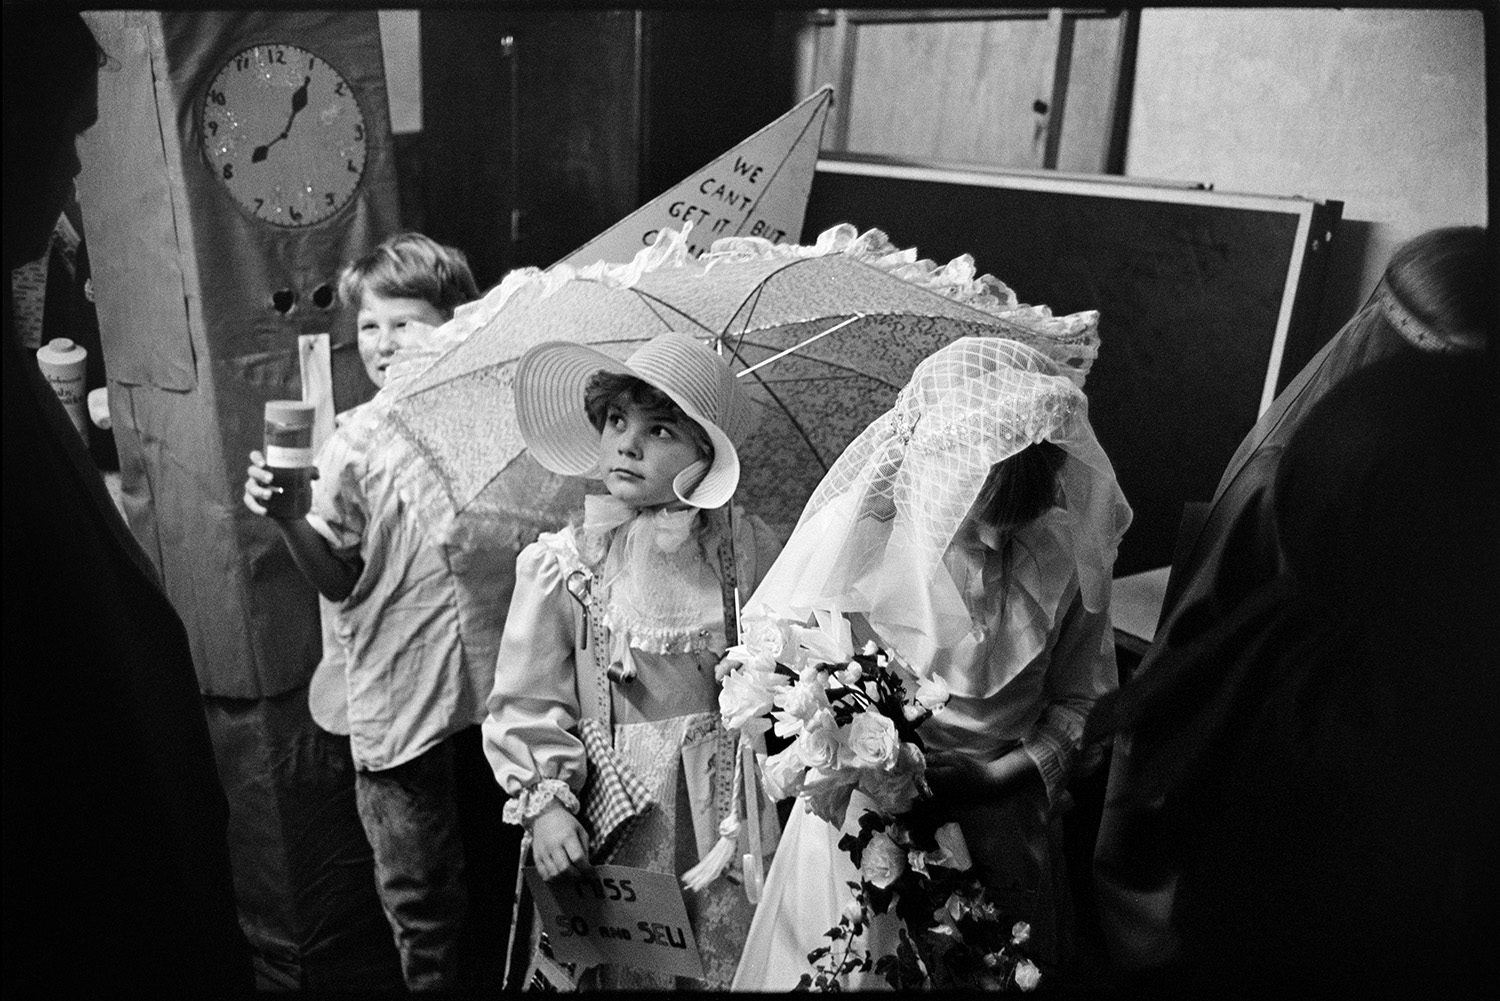 People in fancy dress waiting to go on parade in village hall. 
[Children waiting to go on a fancy dress parade in Northlew Village Hall for Northlew Carnival. One child is dressed as a bride, another girl is carrying a parasol and a child at the back is wearing a grandfather clock costume.]